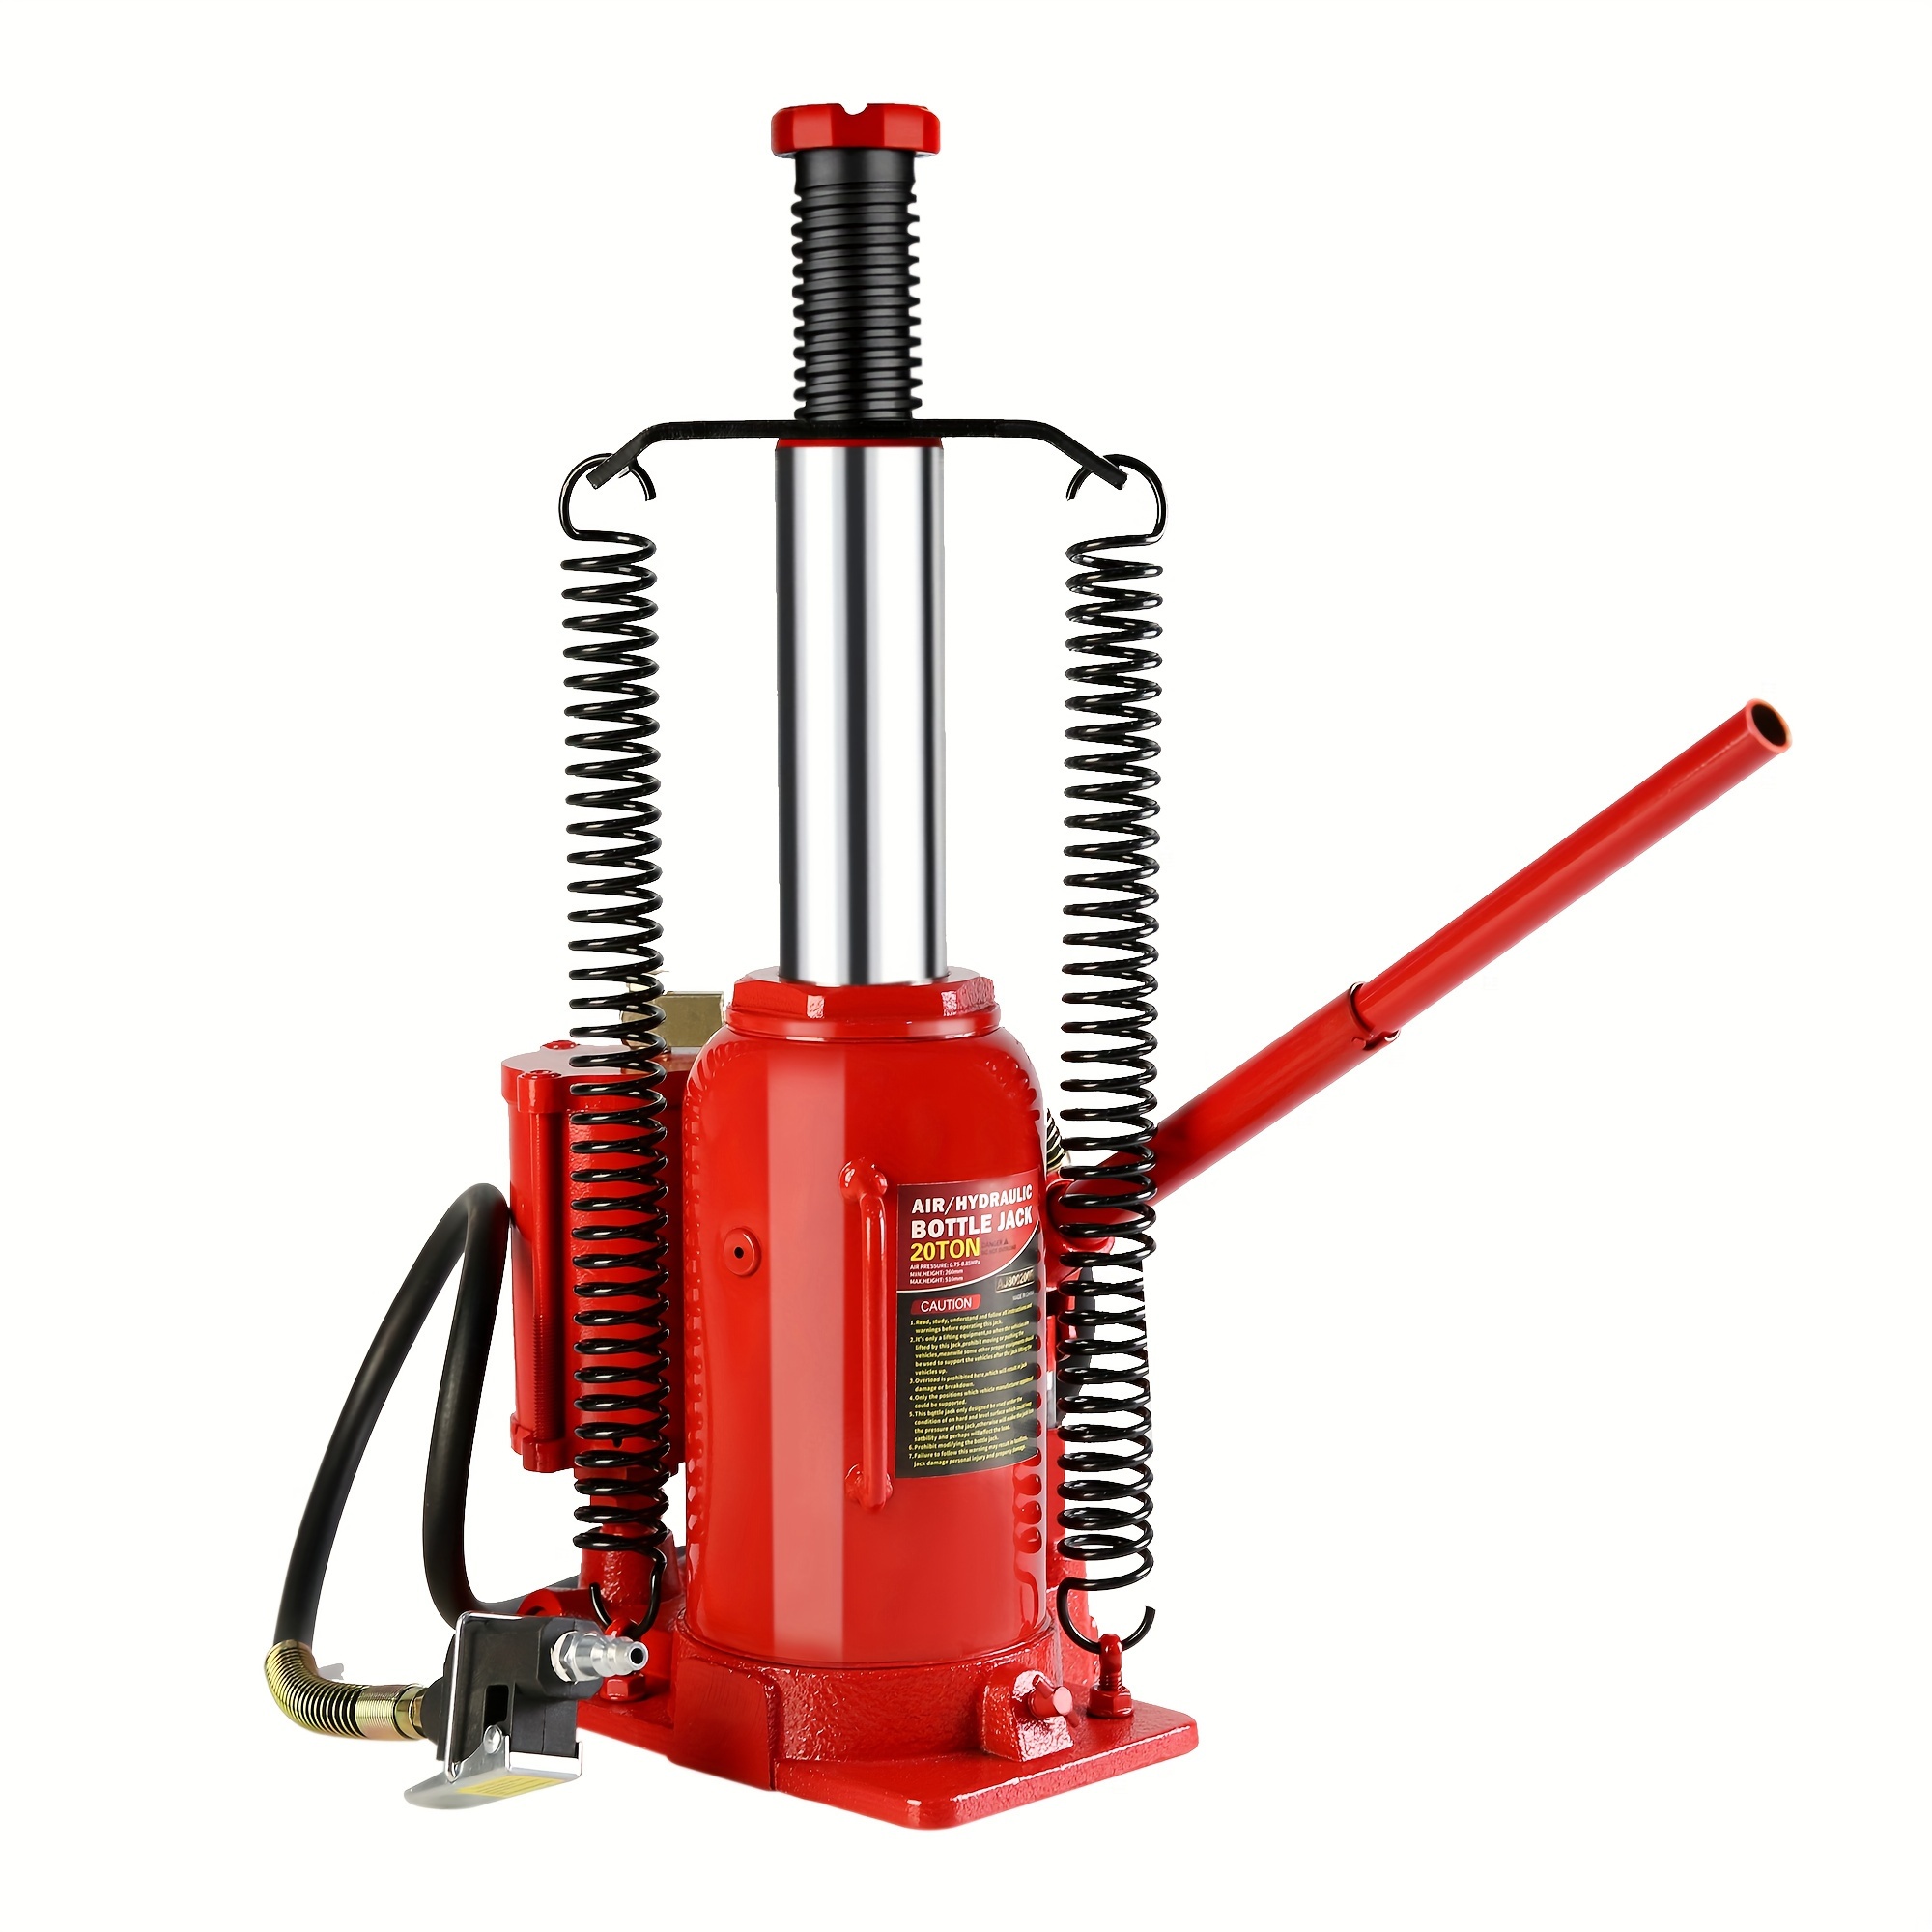 

20 Ton Air Hydraulic Bottle Jack, With Manual Hand Pump Used For The Maintenance Of Automobiles, Agricultural Vehicles, Heavy Trucks, Mobile Machinery, And Heavy Equipment